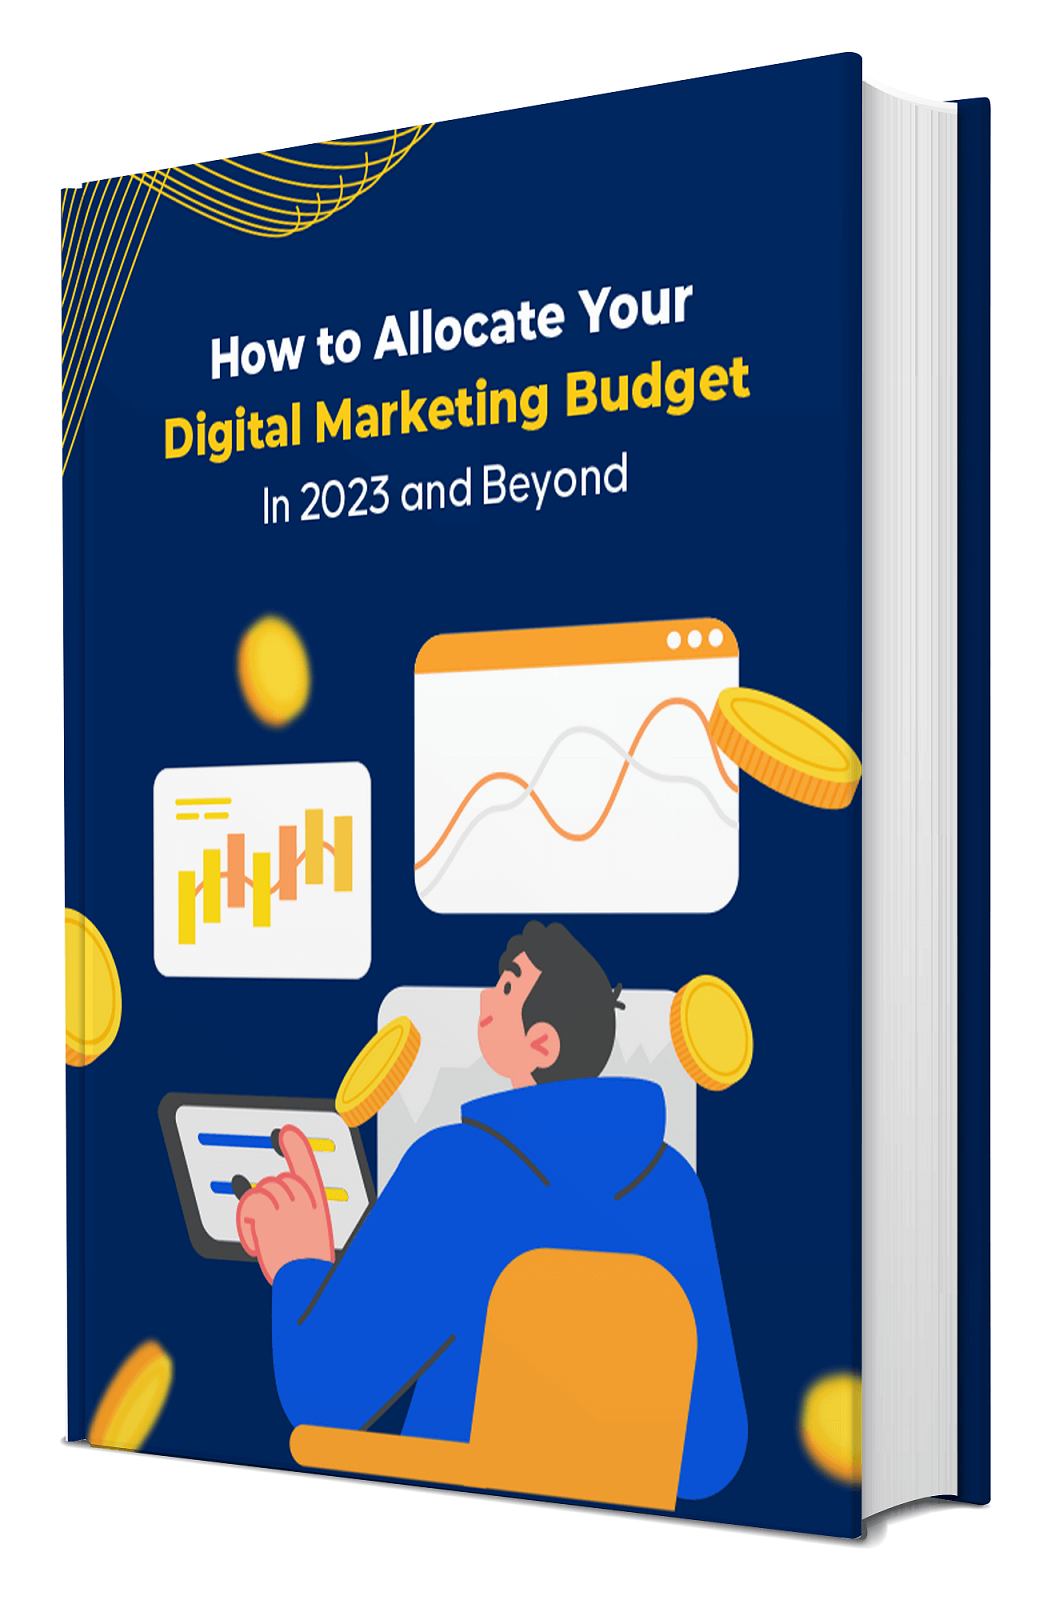 How to Allocate Your Digital Marketing Budget - Ebook Cover